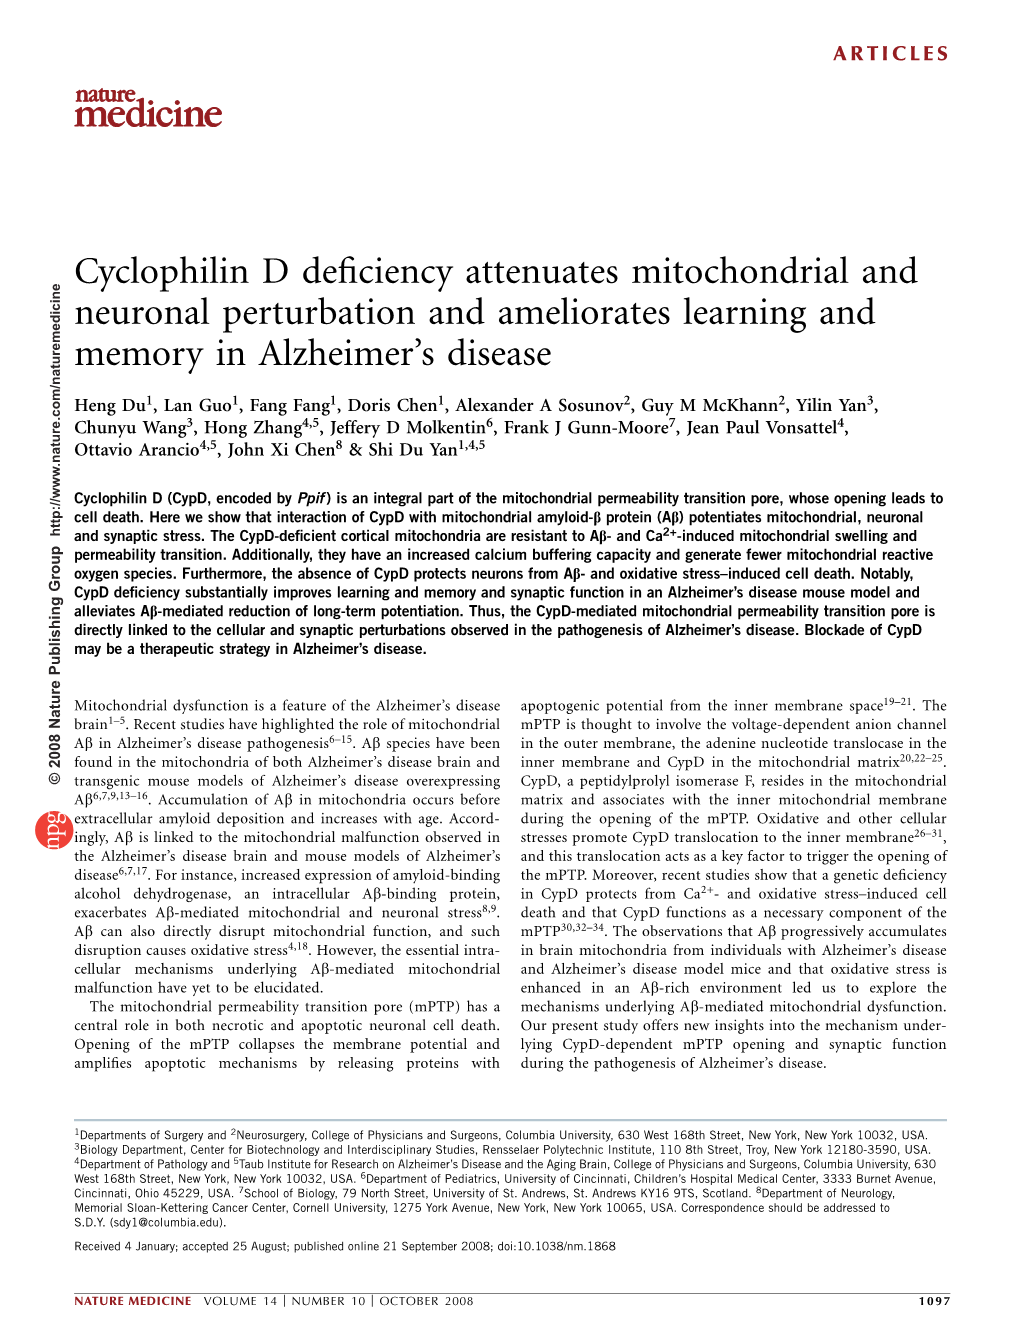 Cyclophilin D Deficiency Attenuates Mitochondrial and Neuronal